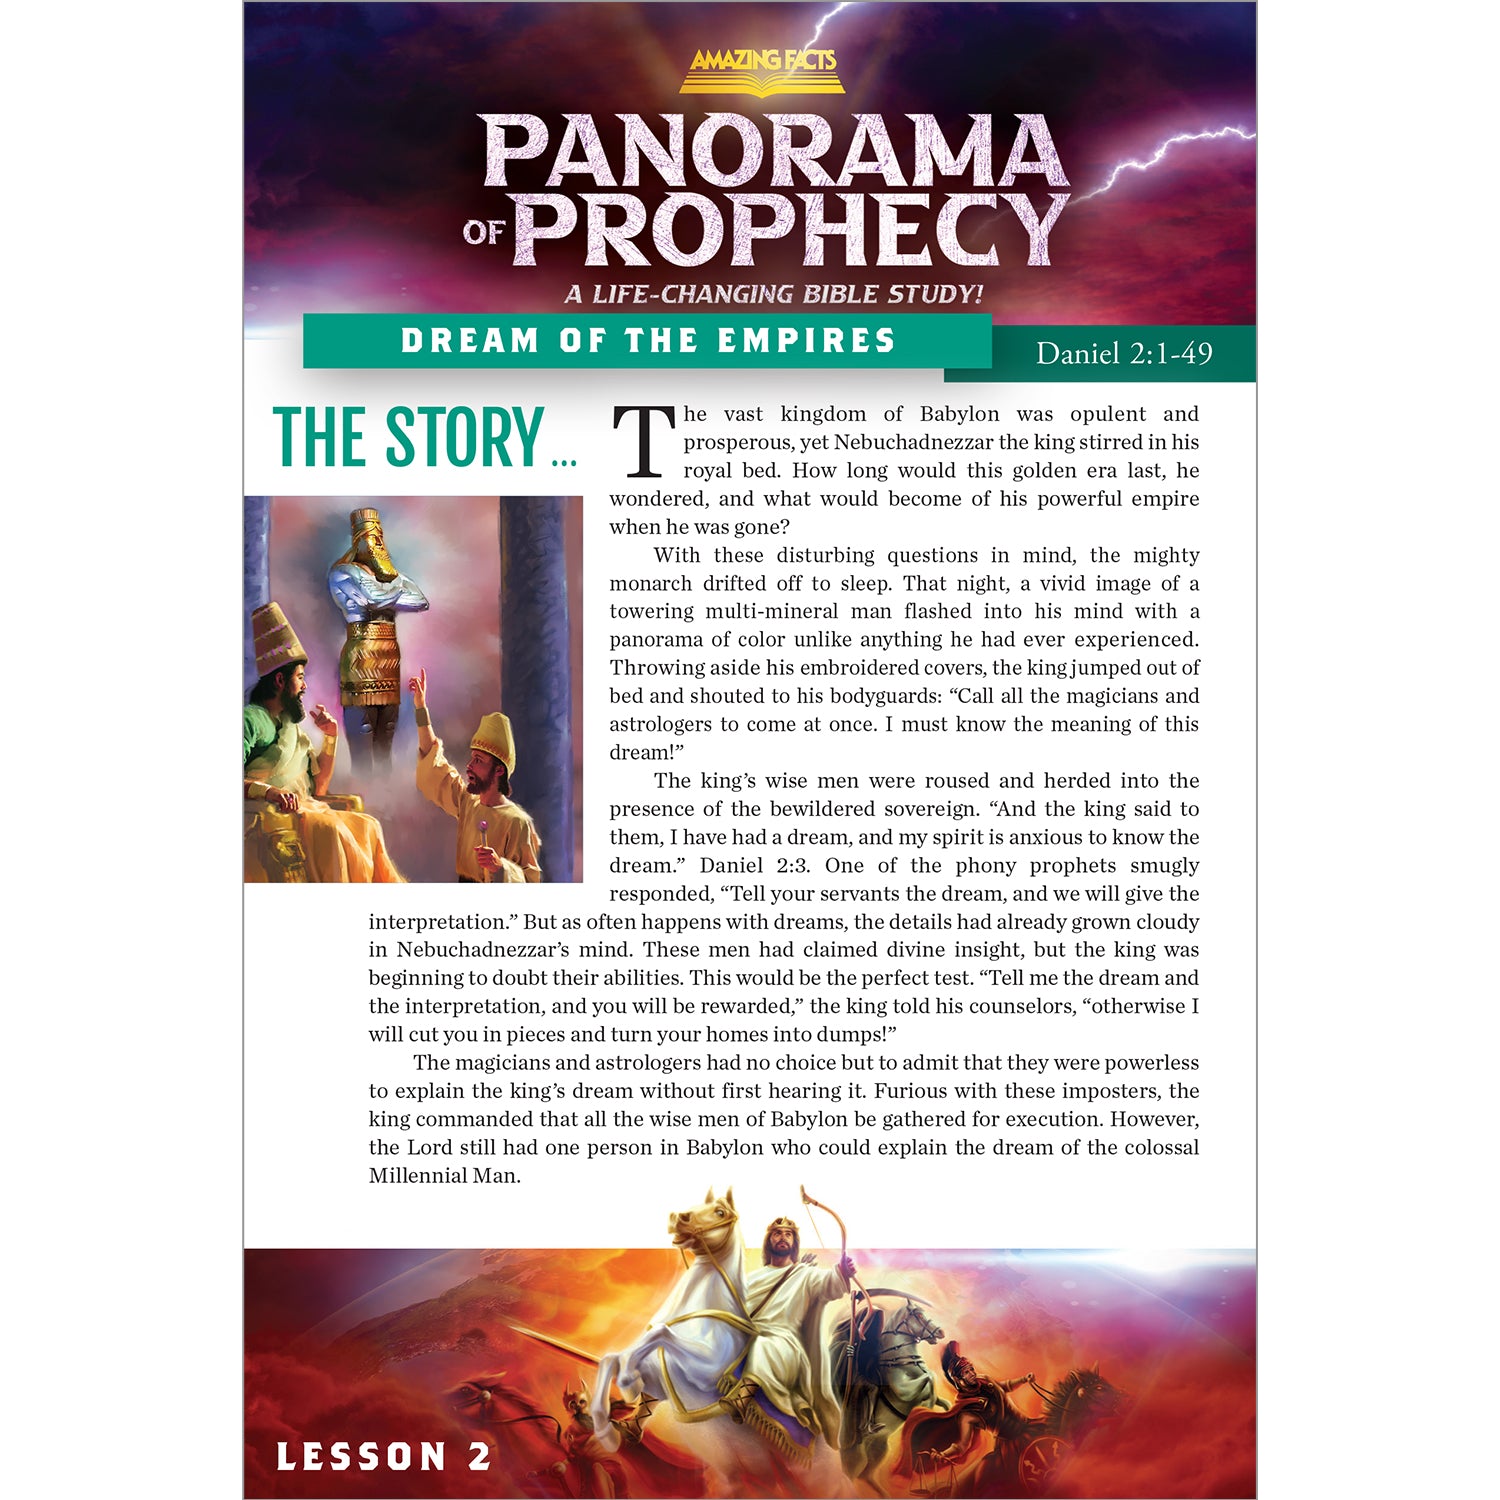 Panorama of Prophecy: Dream of the Empires Study Guide 02 by Doug Batchelor